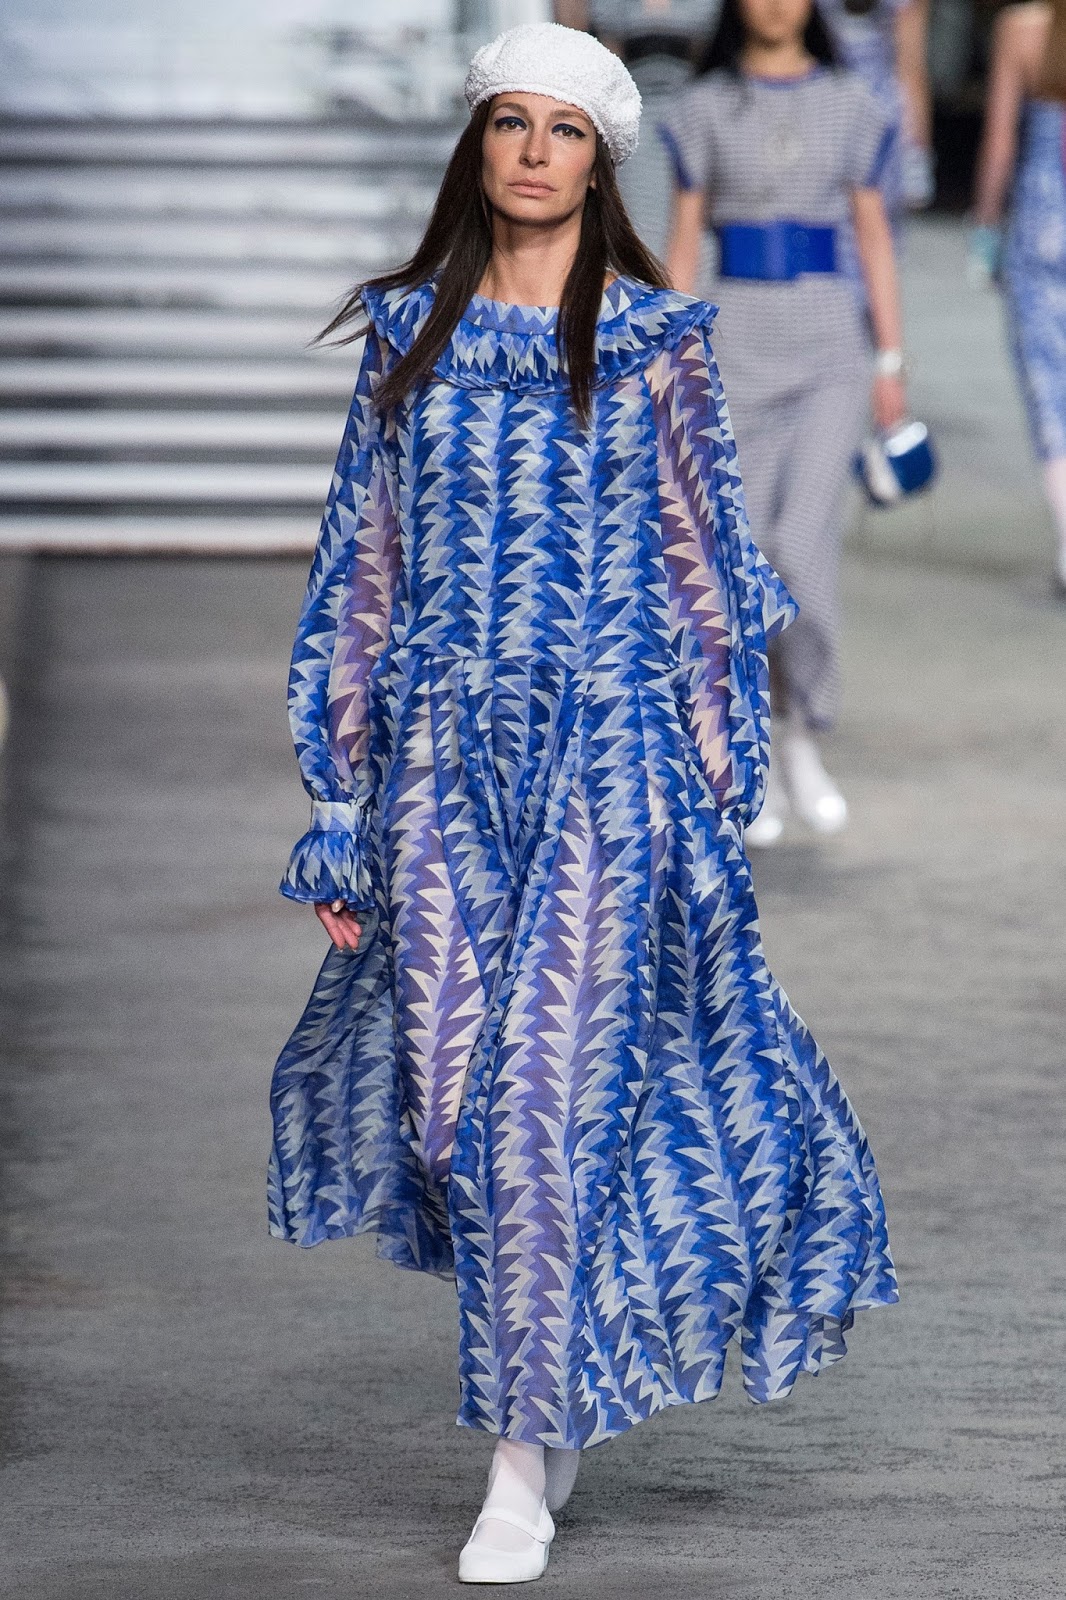 THE CHANEL BLUES